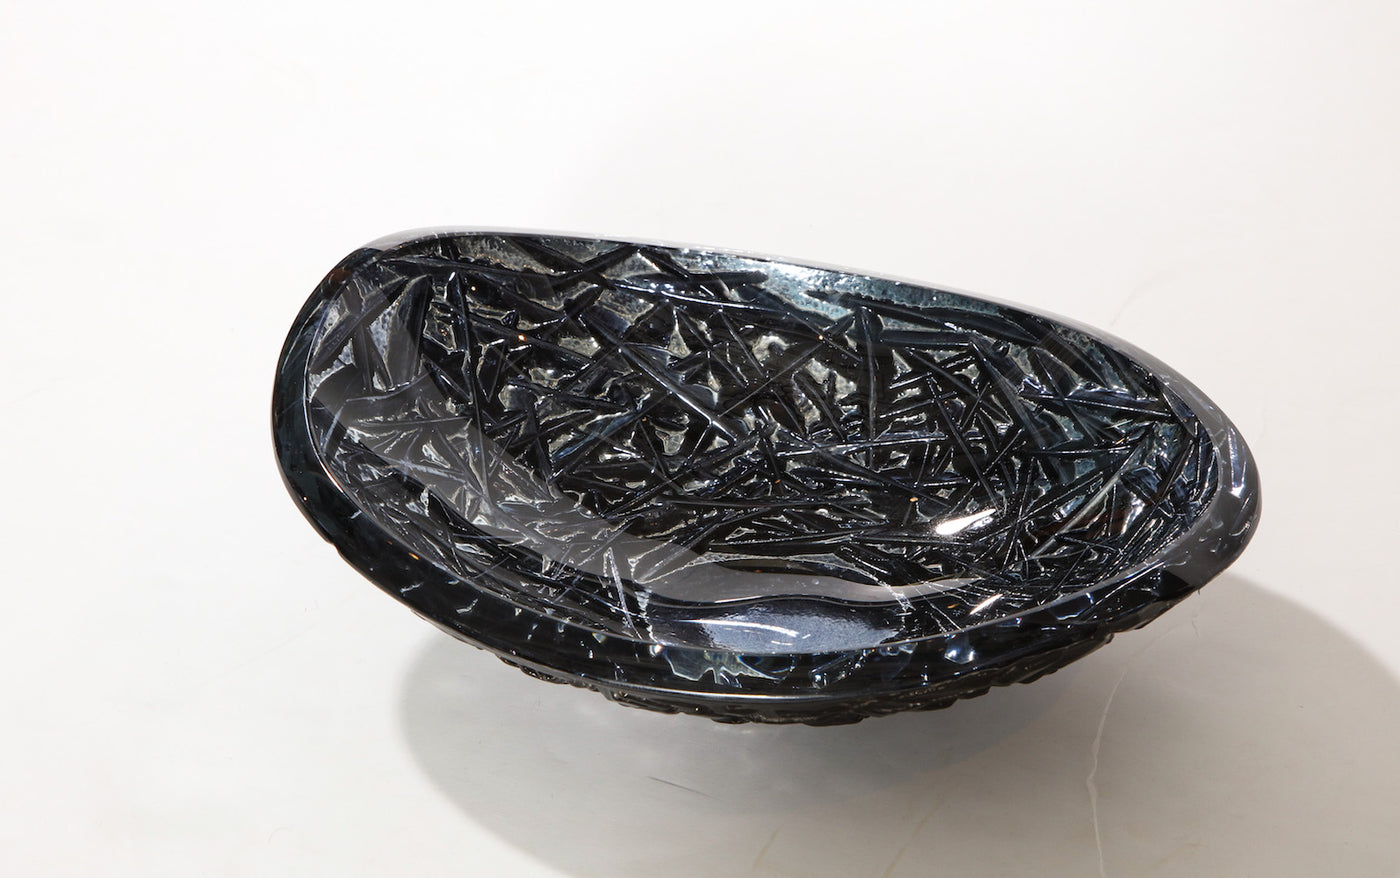 Studio-Made Carved Glass Dish #5 by Ghiró Studio